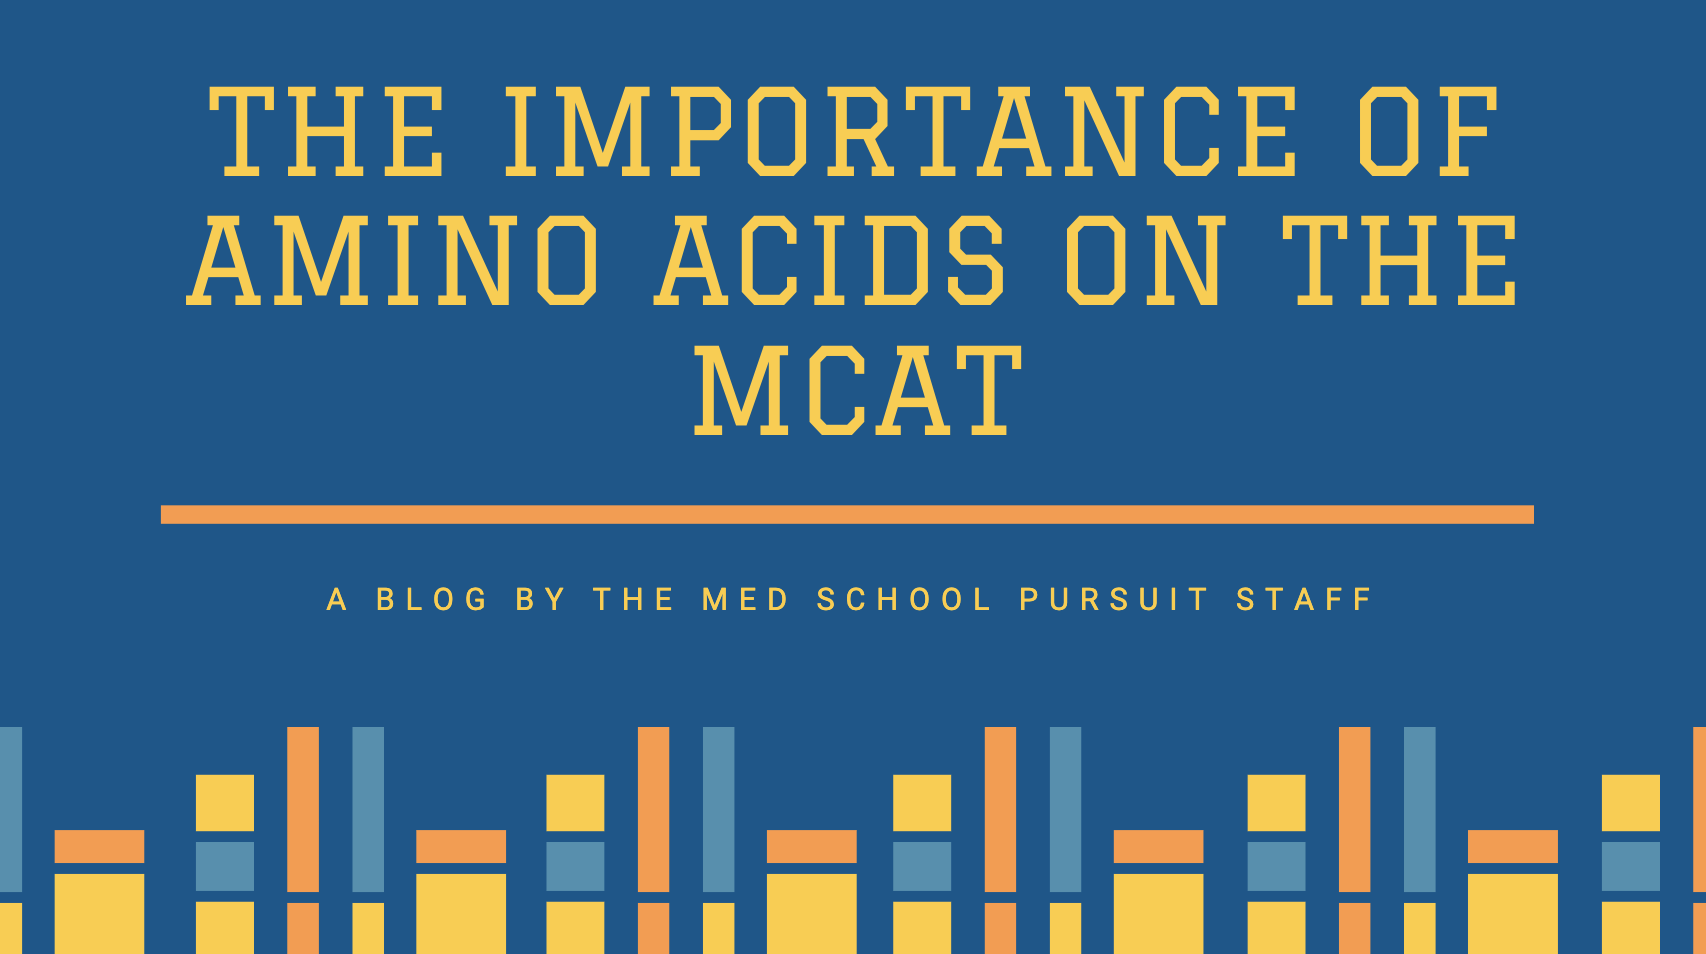 The importance of Amino Acids on the MCAT